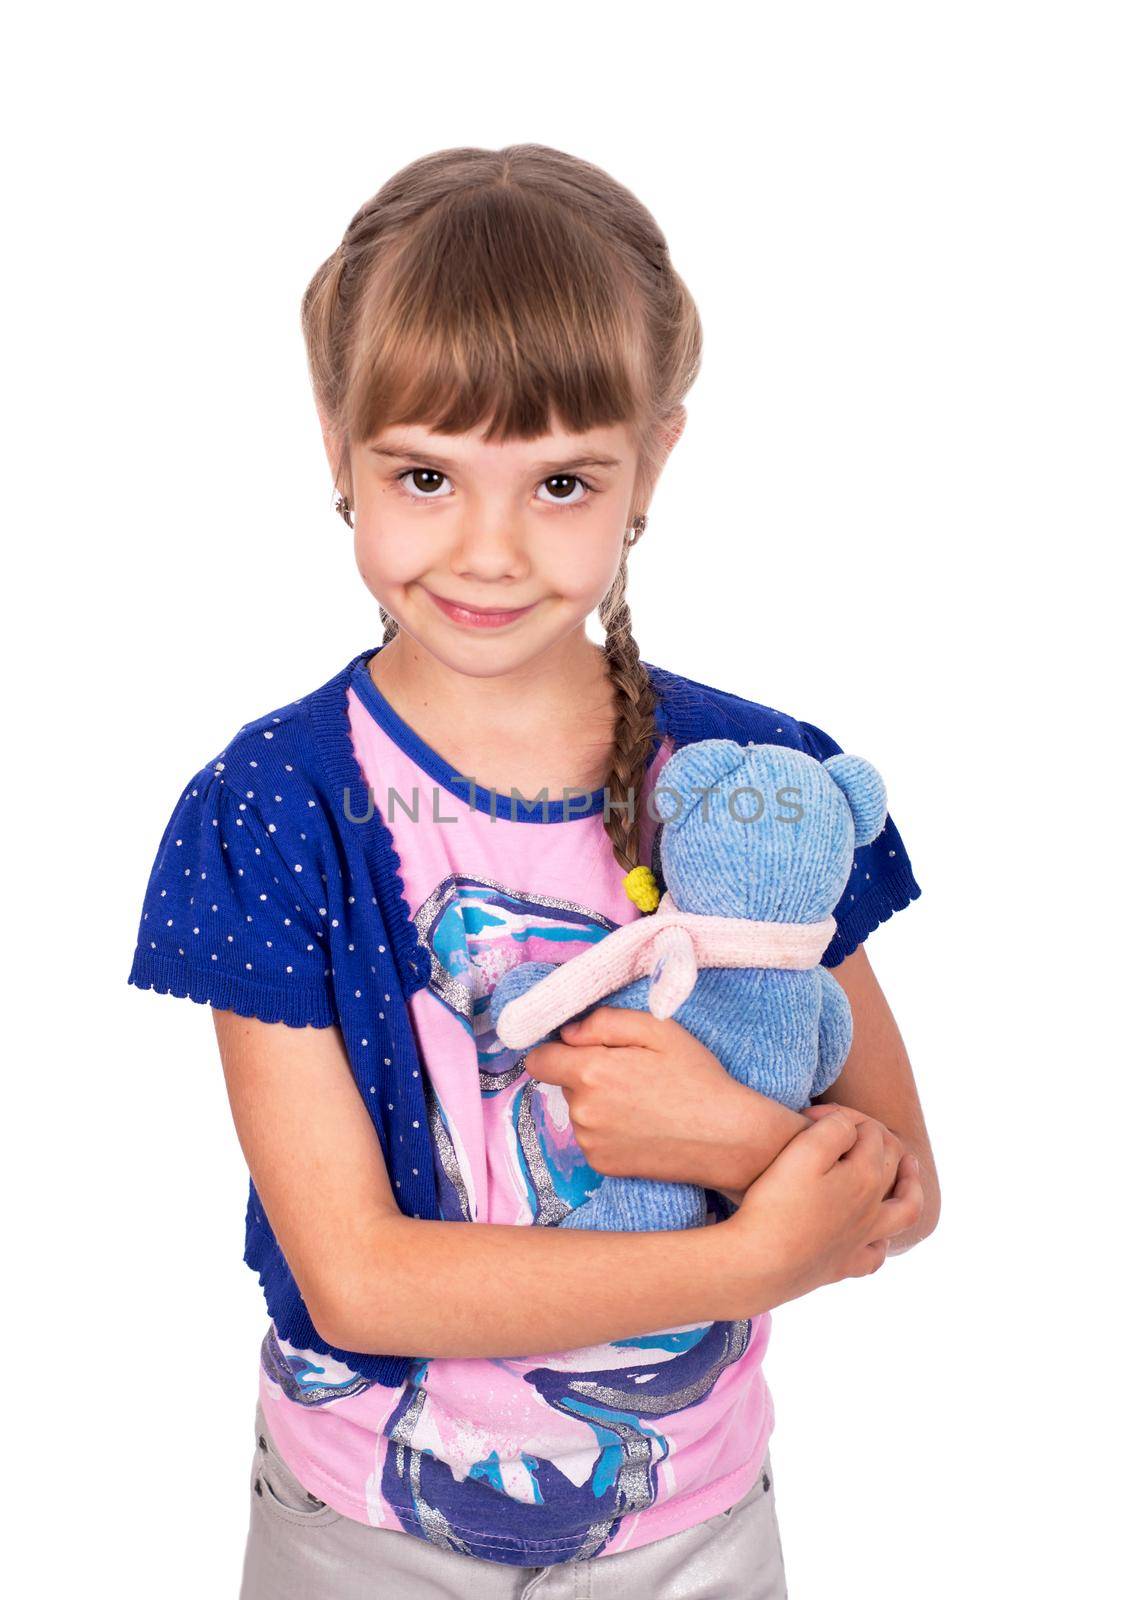 Little girl holding a teddy bear. Isolated on white background. Girl hugging two teddybears. Happy child. by aprilphoto